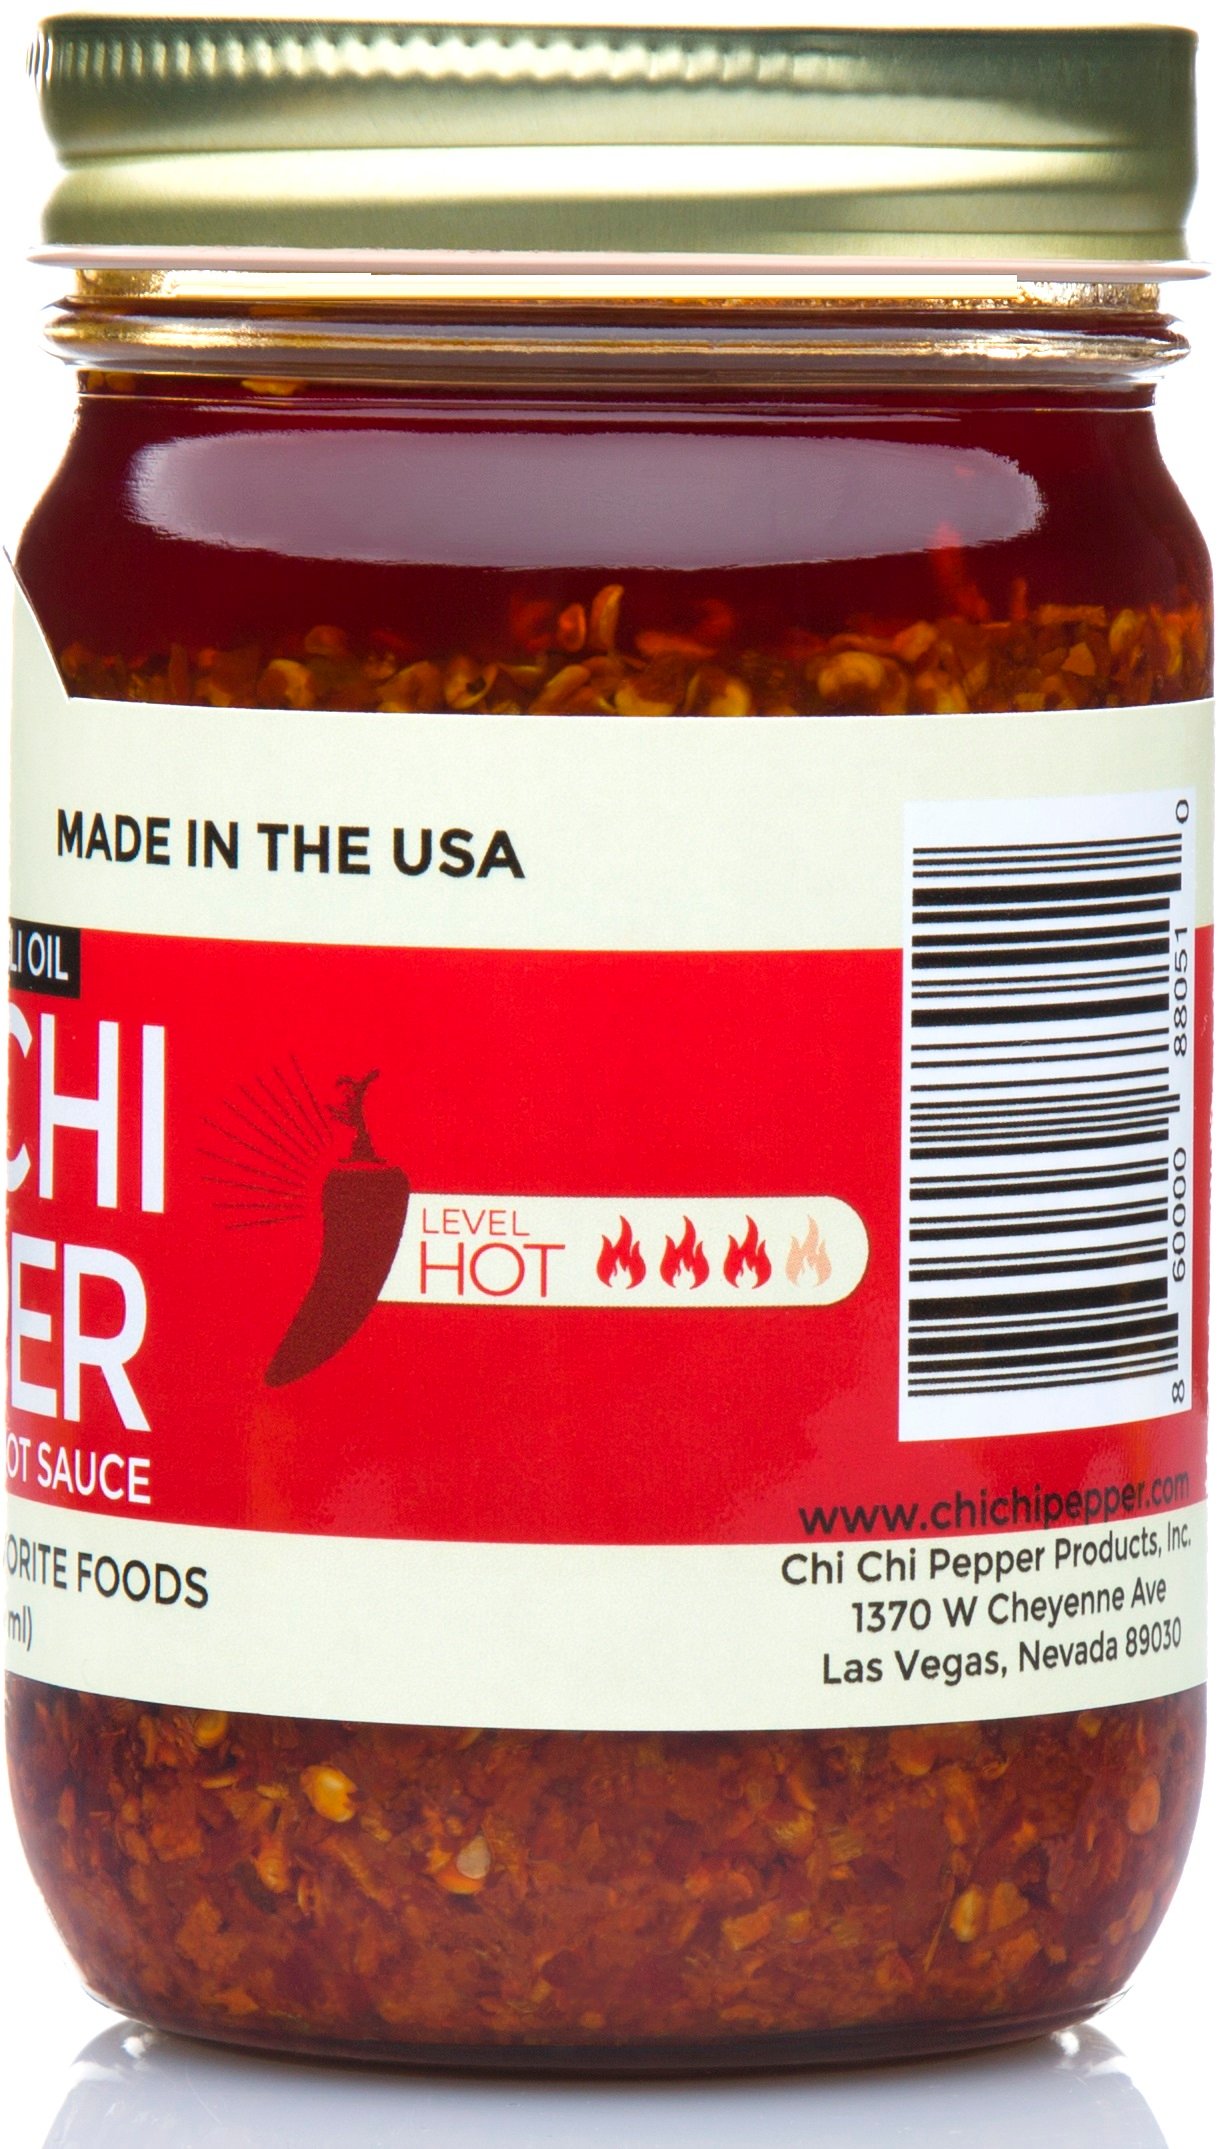 Chi Chi Pepper - All Natural Premium Crunchy Chili Oil Condiment With Garlic & Olive Oil (Spicy) Large 12 OZ Jar